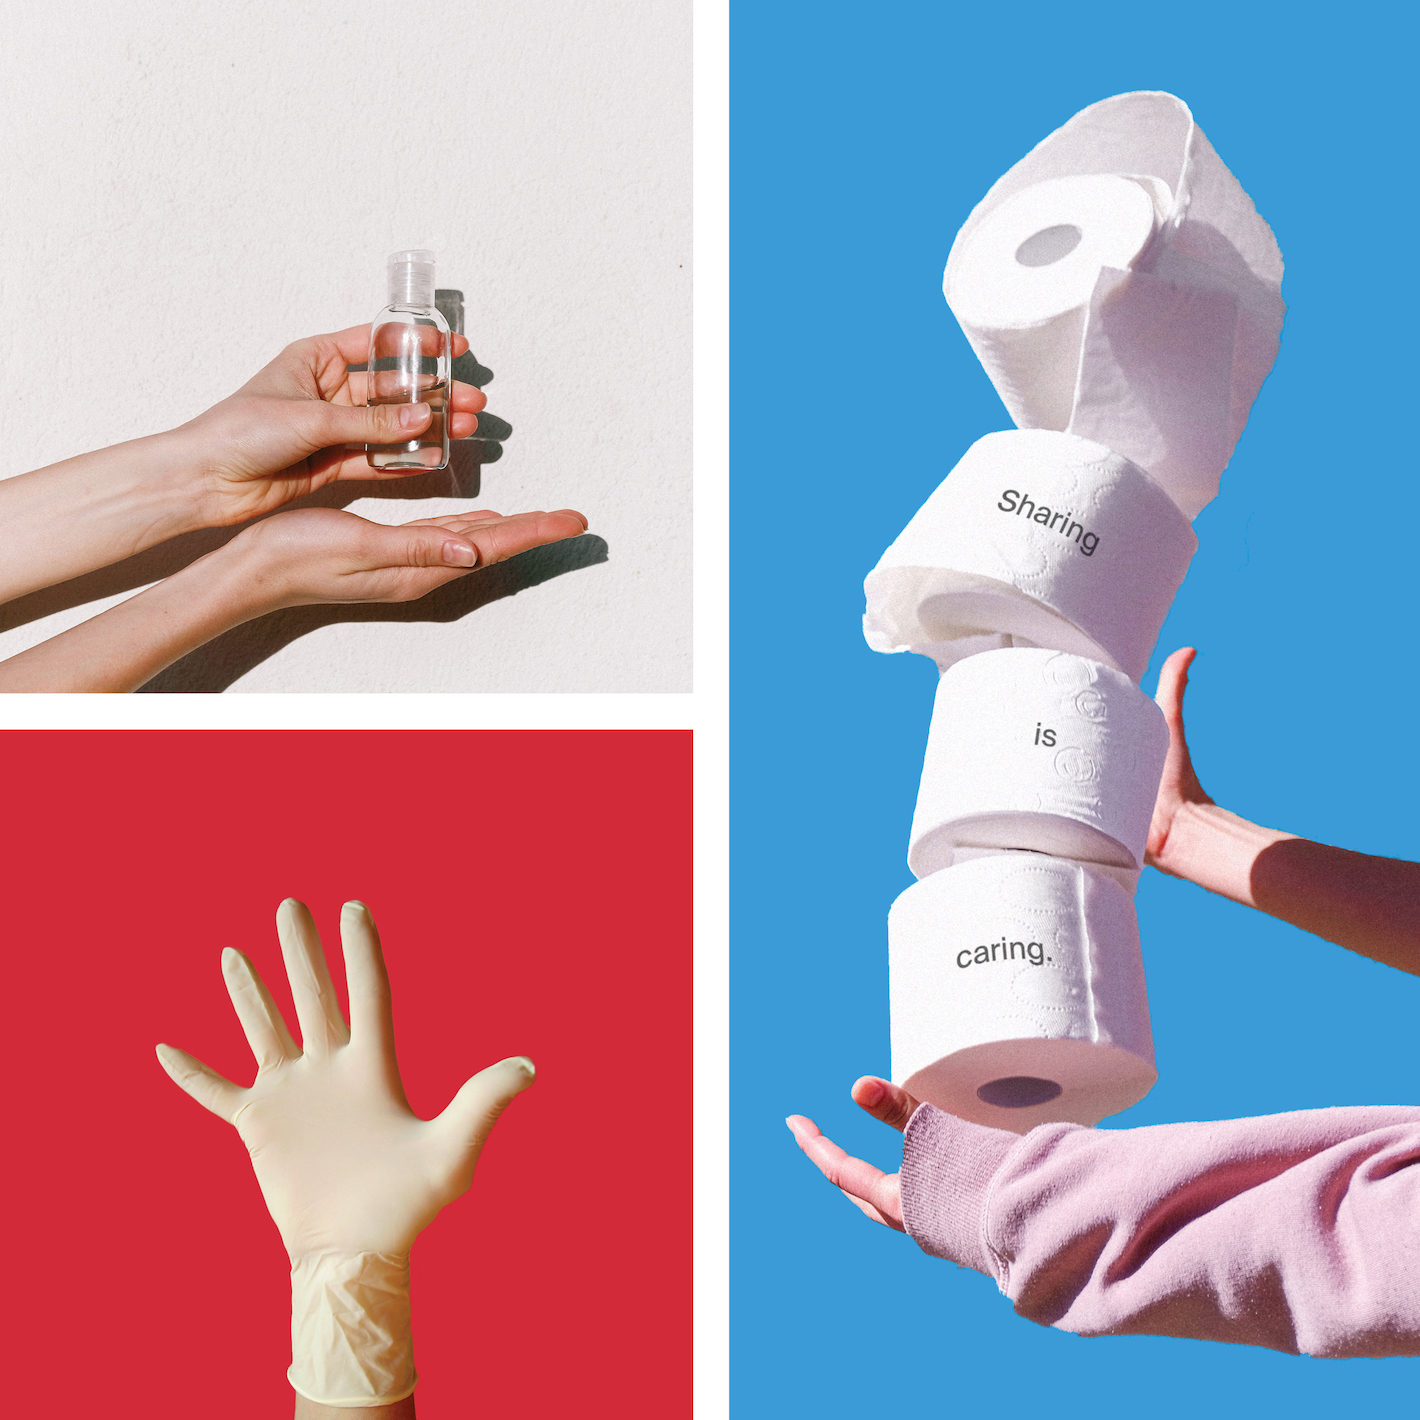 This is a collage of three stock images: the top left shows a pair of hands using hand sanitizer on a stark white background, while the bottom left shows a single hand ascending with a glove on a stark red background. The right side (which is as tall as the other two combined) features a pair of hands balancing a large stack of toilet paper, on which the text 'Sharing is caring' is printed. This final image is set on a sky blue background.